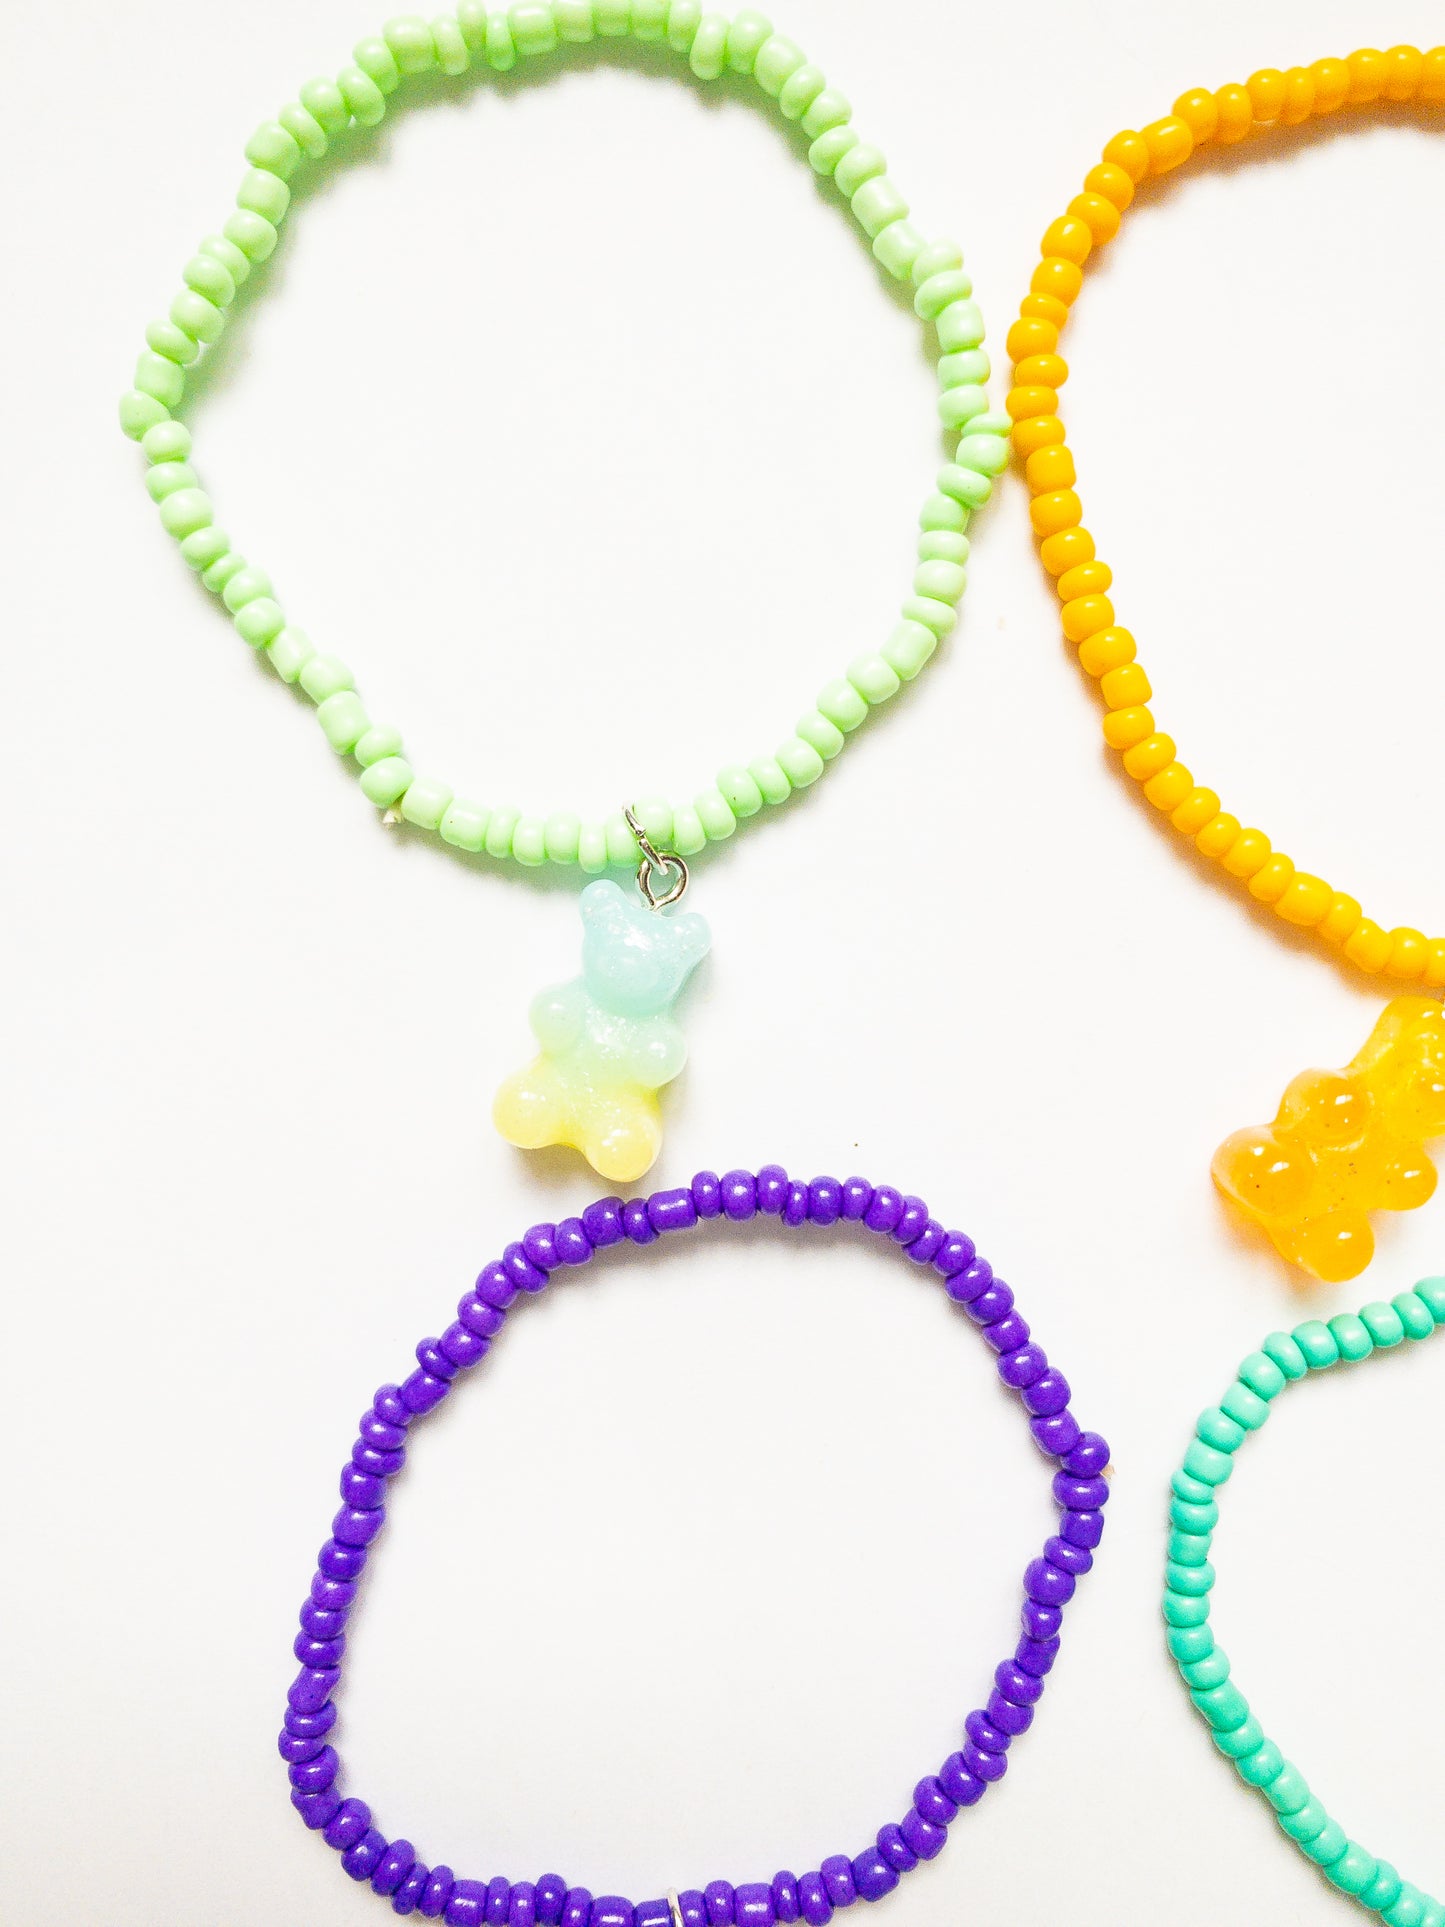 A delectable set of 6 ombre and glittery gummy bear charms on colorful stretchy beaded bracelets. 